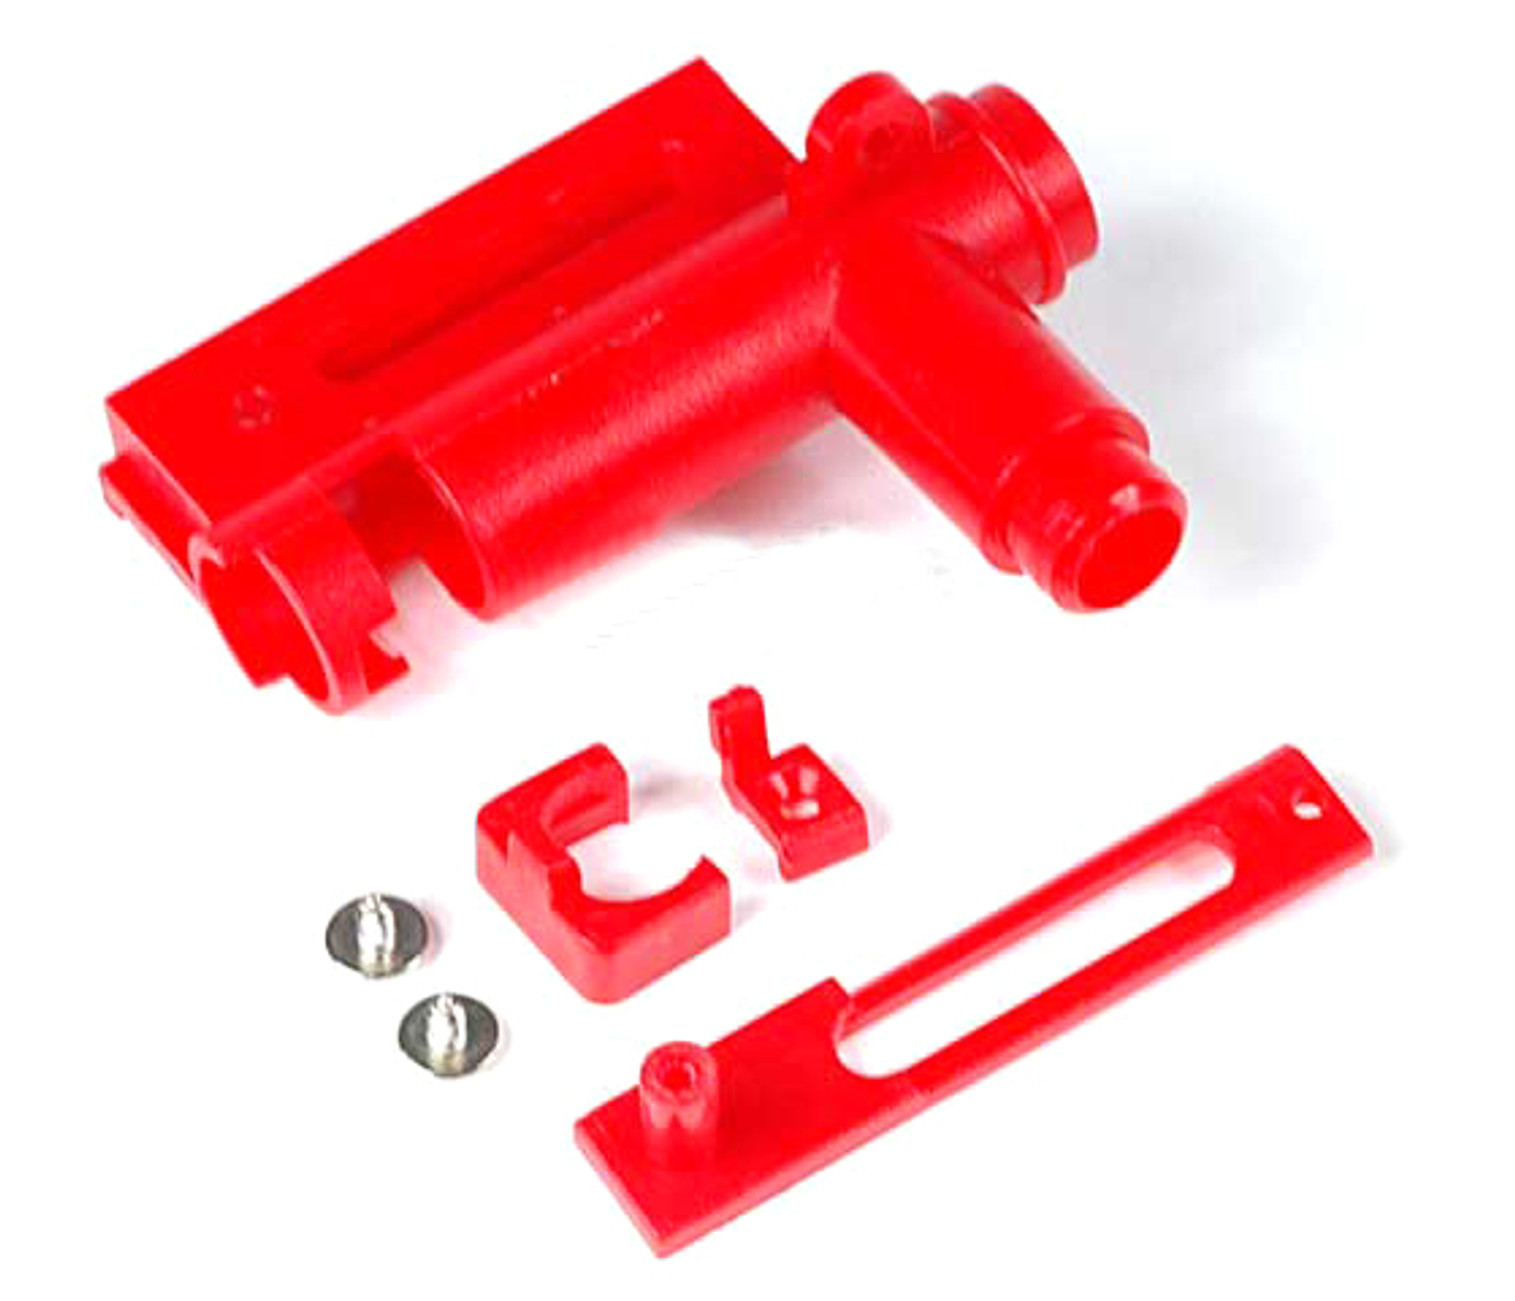 Element / Matrix Polycarbonate One Piece Hopup Chamber For AK Series Airsoft AEG